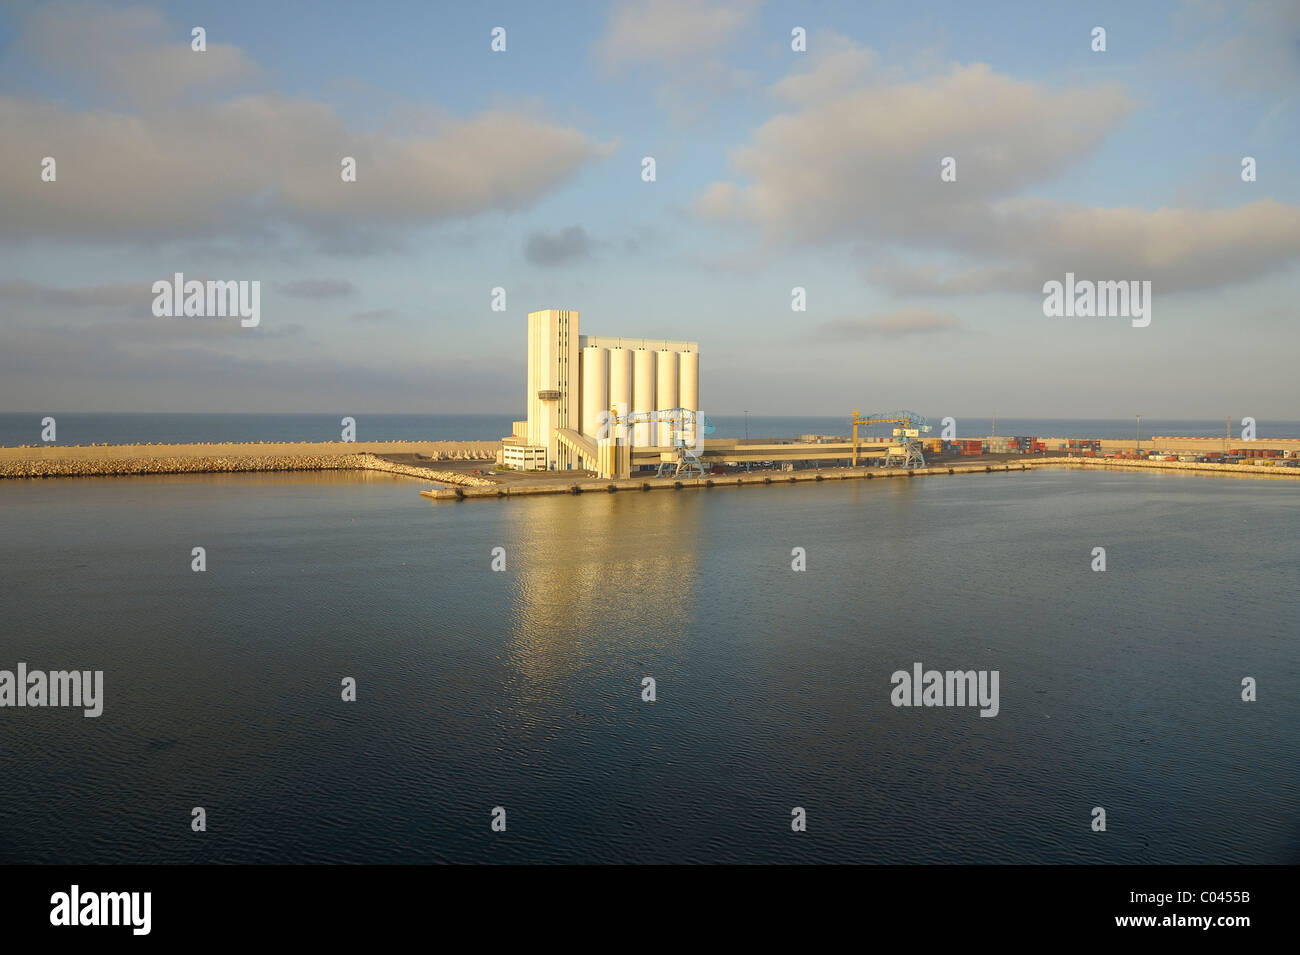 The grain silos and ship loading elevators at agadir port, on a sunny day. Stock Photo